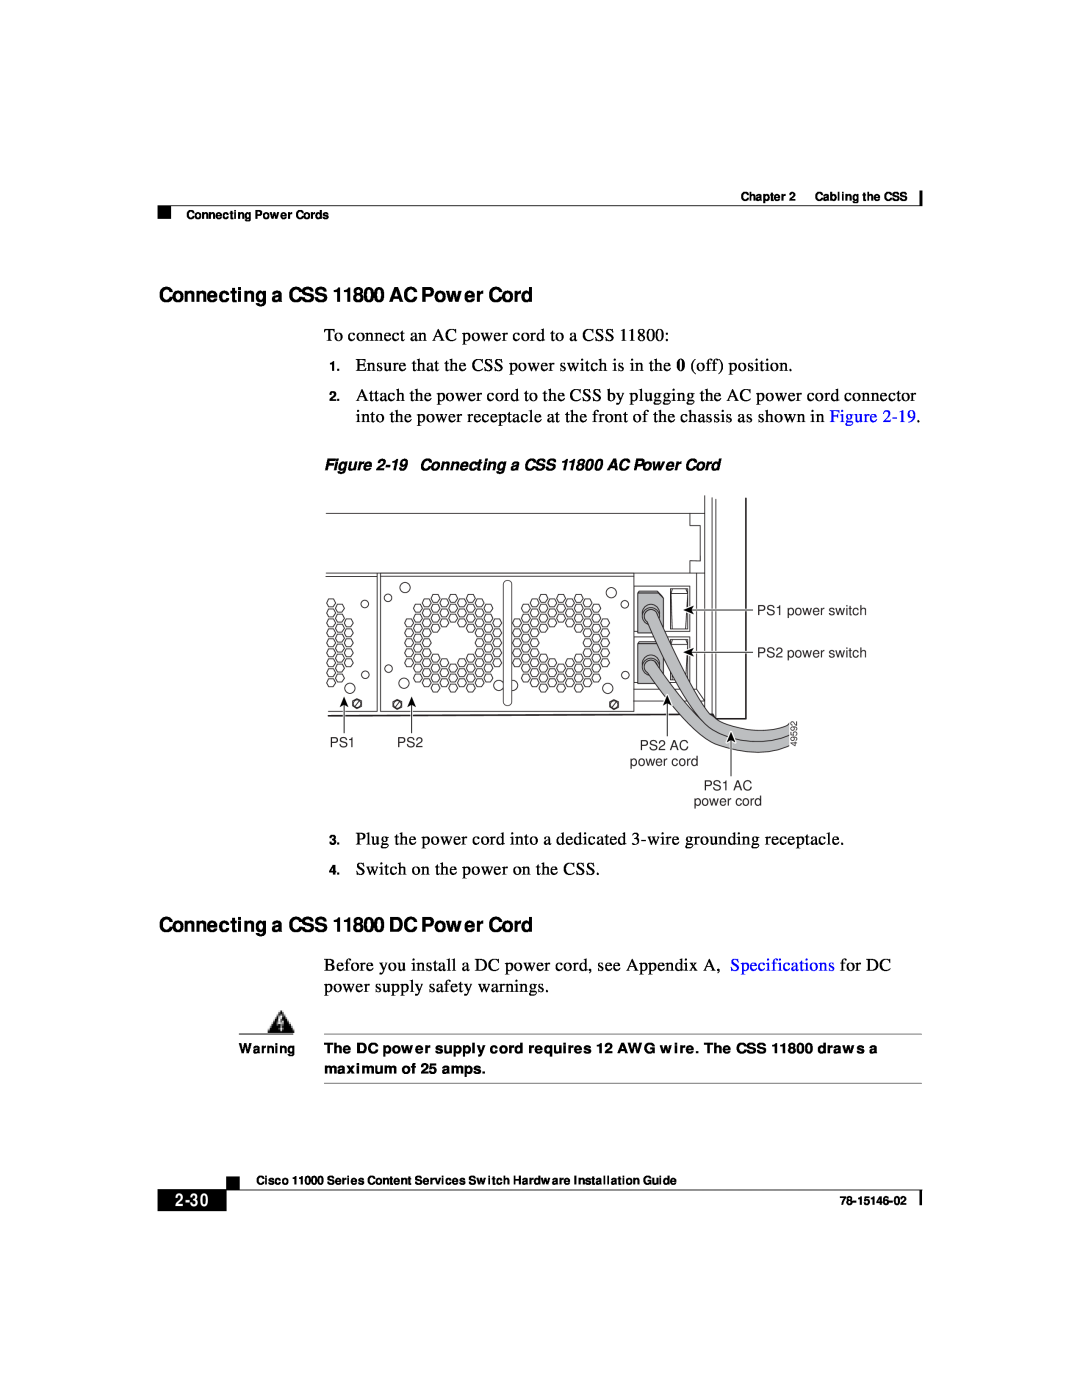 Cisco Systems 11000 Series manual Connecting a CSS 11800 AC Power Cord, Connecting a CSS 11800 DC Power Cord, 2-30 